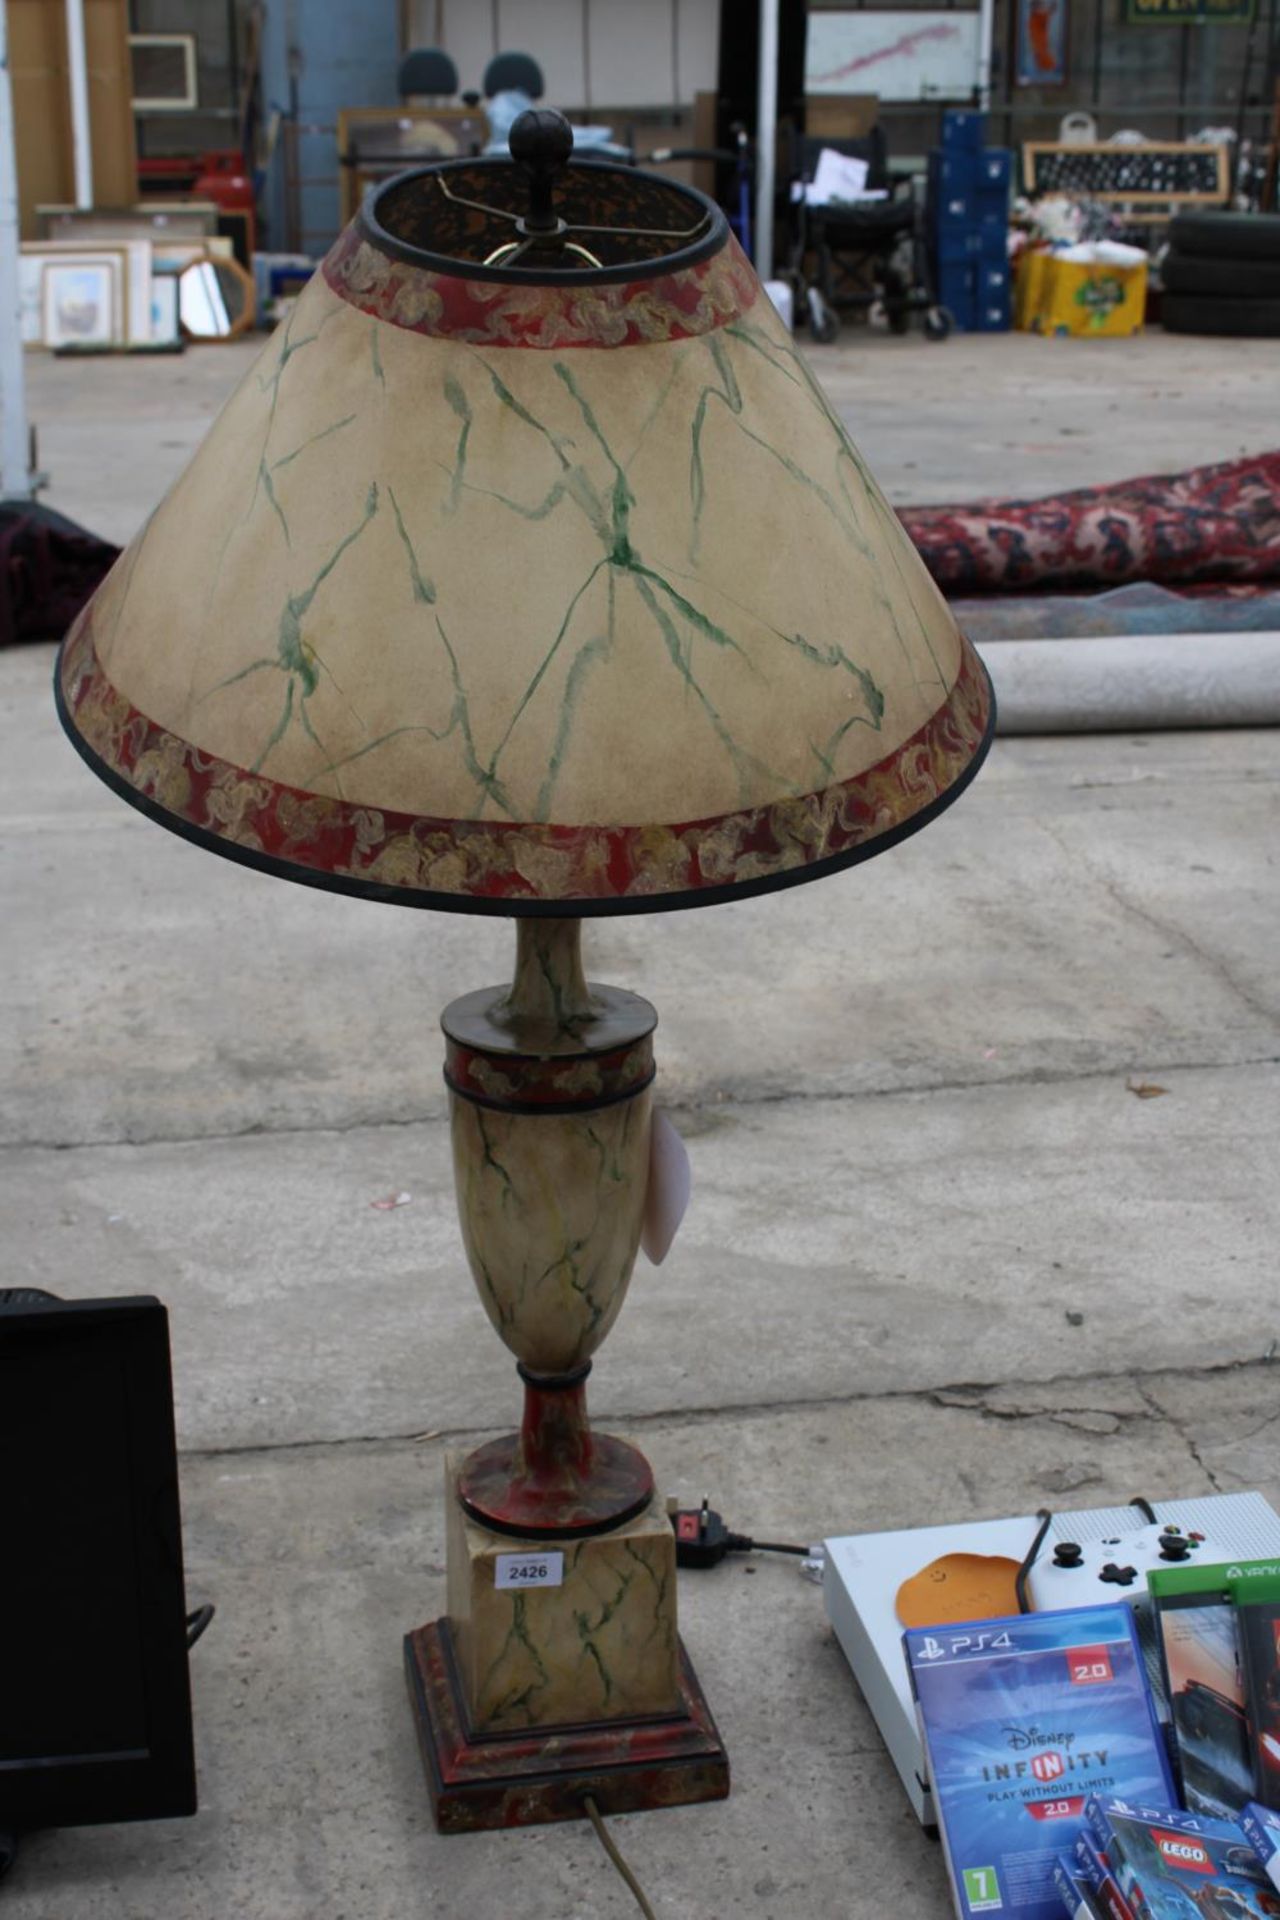 A LARGE ORNATE AND DECORATIVE TABLE LAMP WITH SHADE - Image 2 of 3